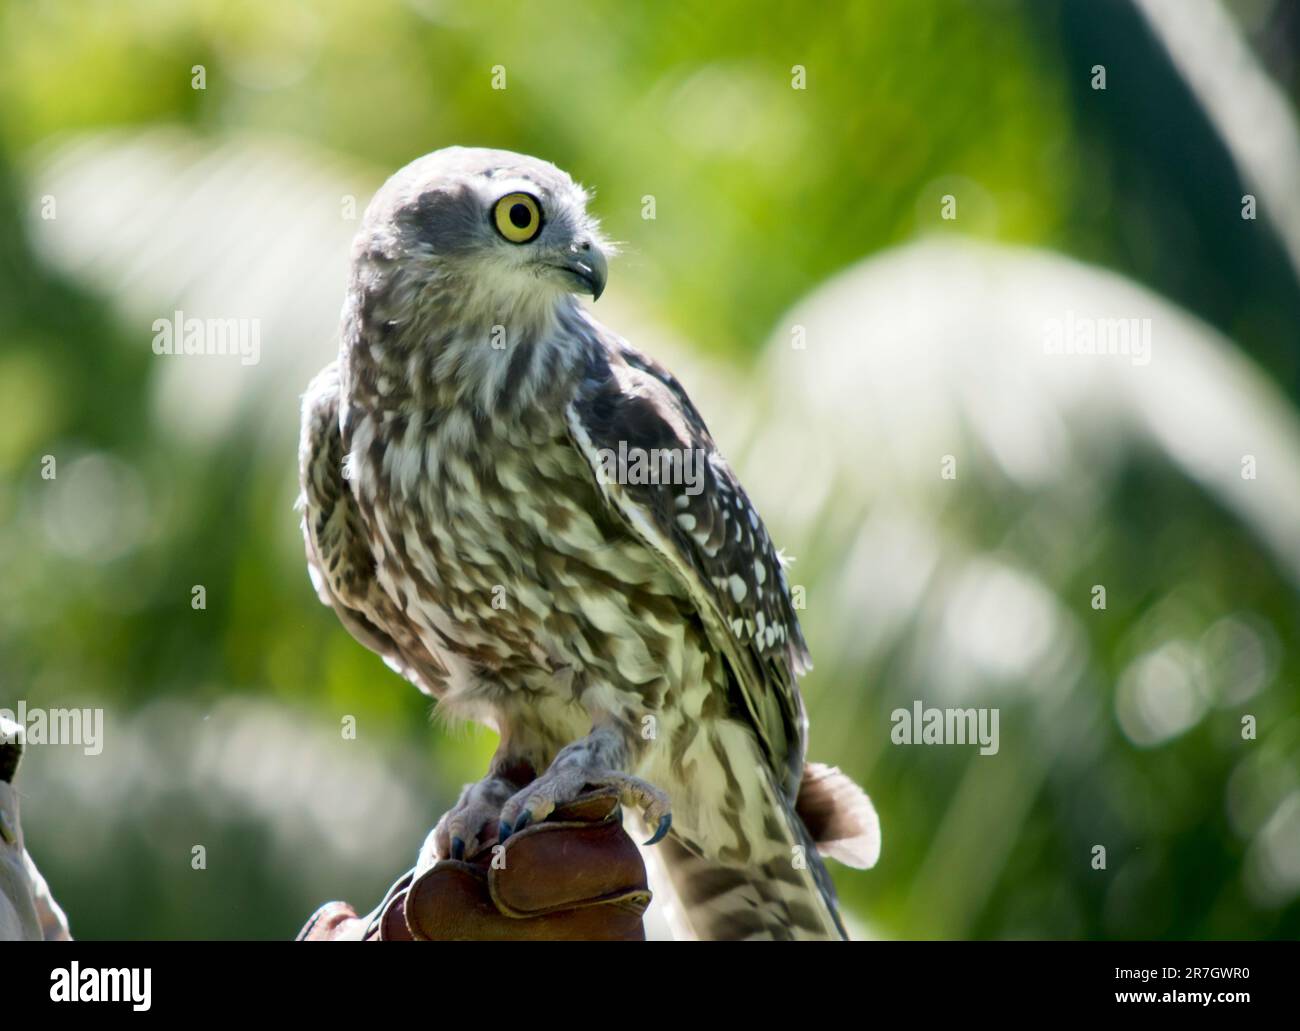 Closeup of a bird's body covered in brown feathers with white edges Stock  Photo - Alamy